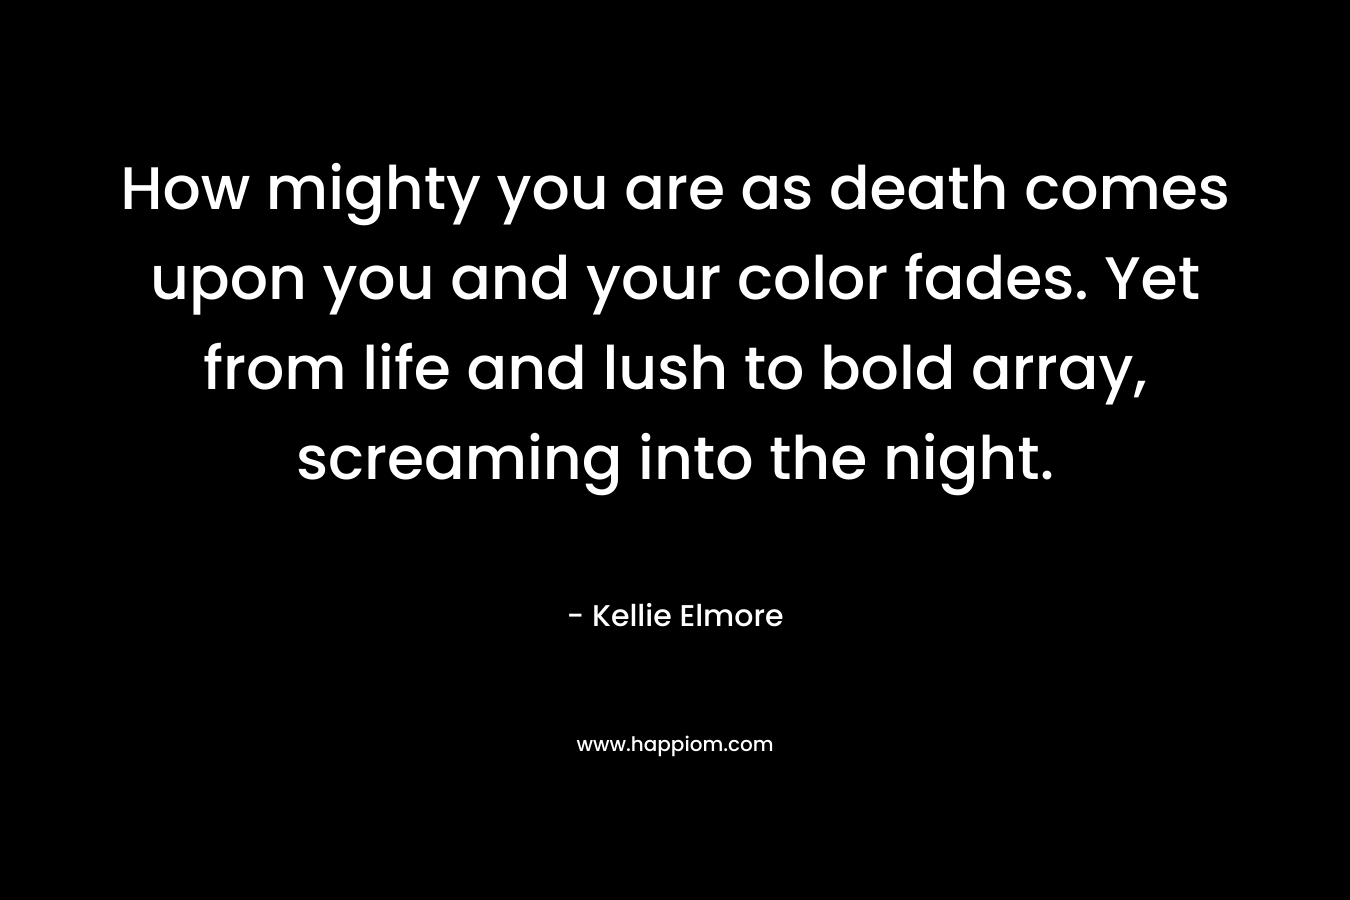 How mighty you are as death comes upon you and your color fades. Yet from life and lush to bold array, screaming into the night. – Kellie Elmore